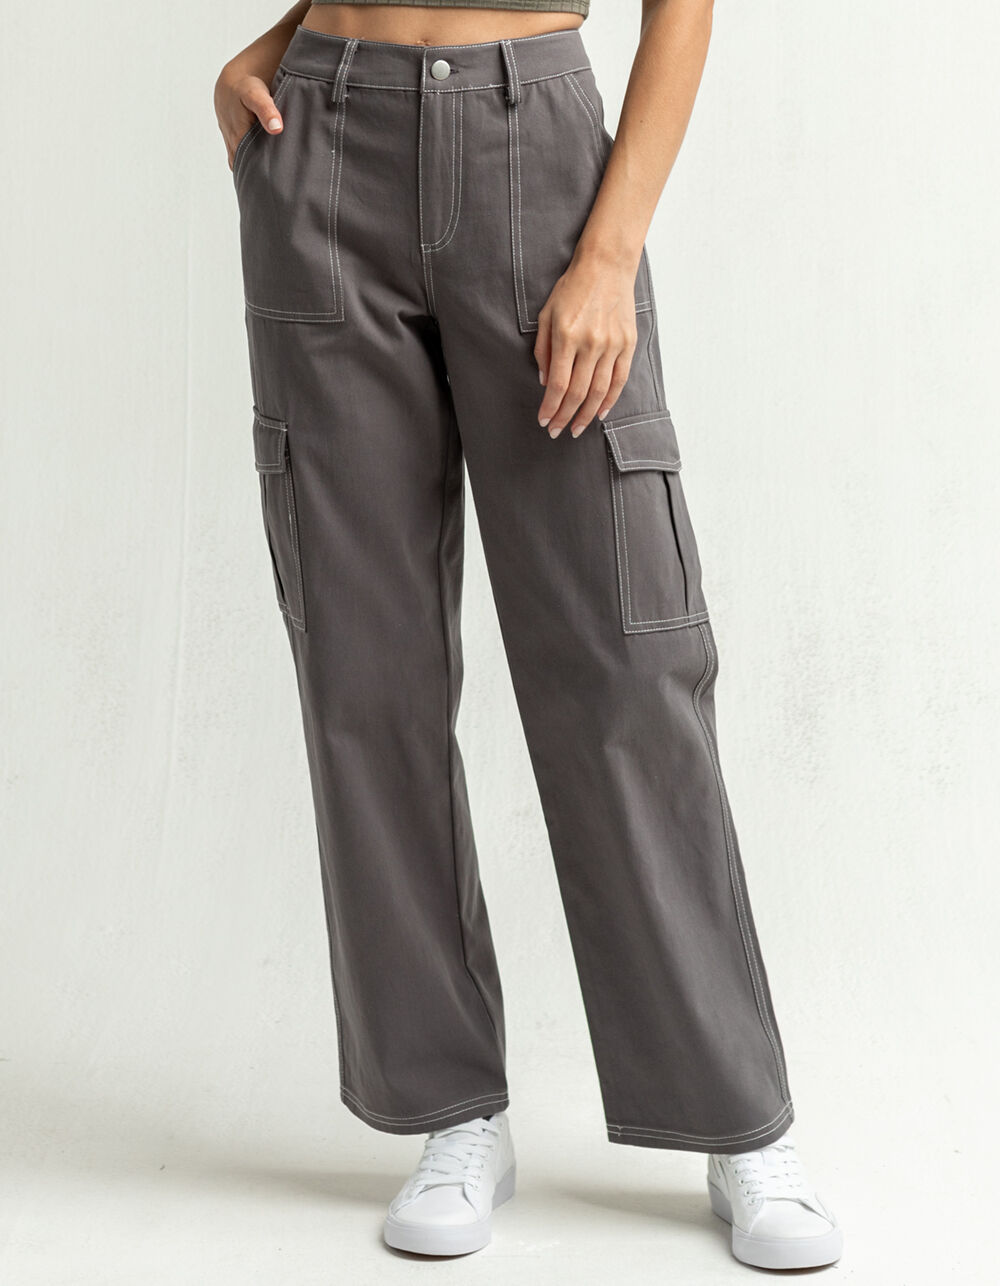 Womens Cargo Pants  Abercrombie  Fitch